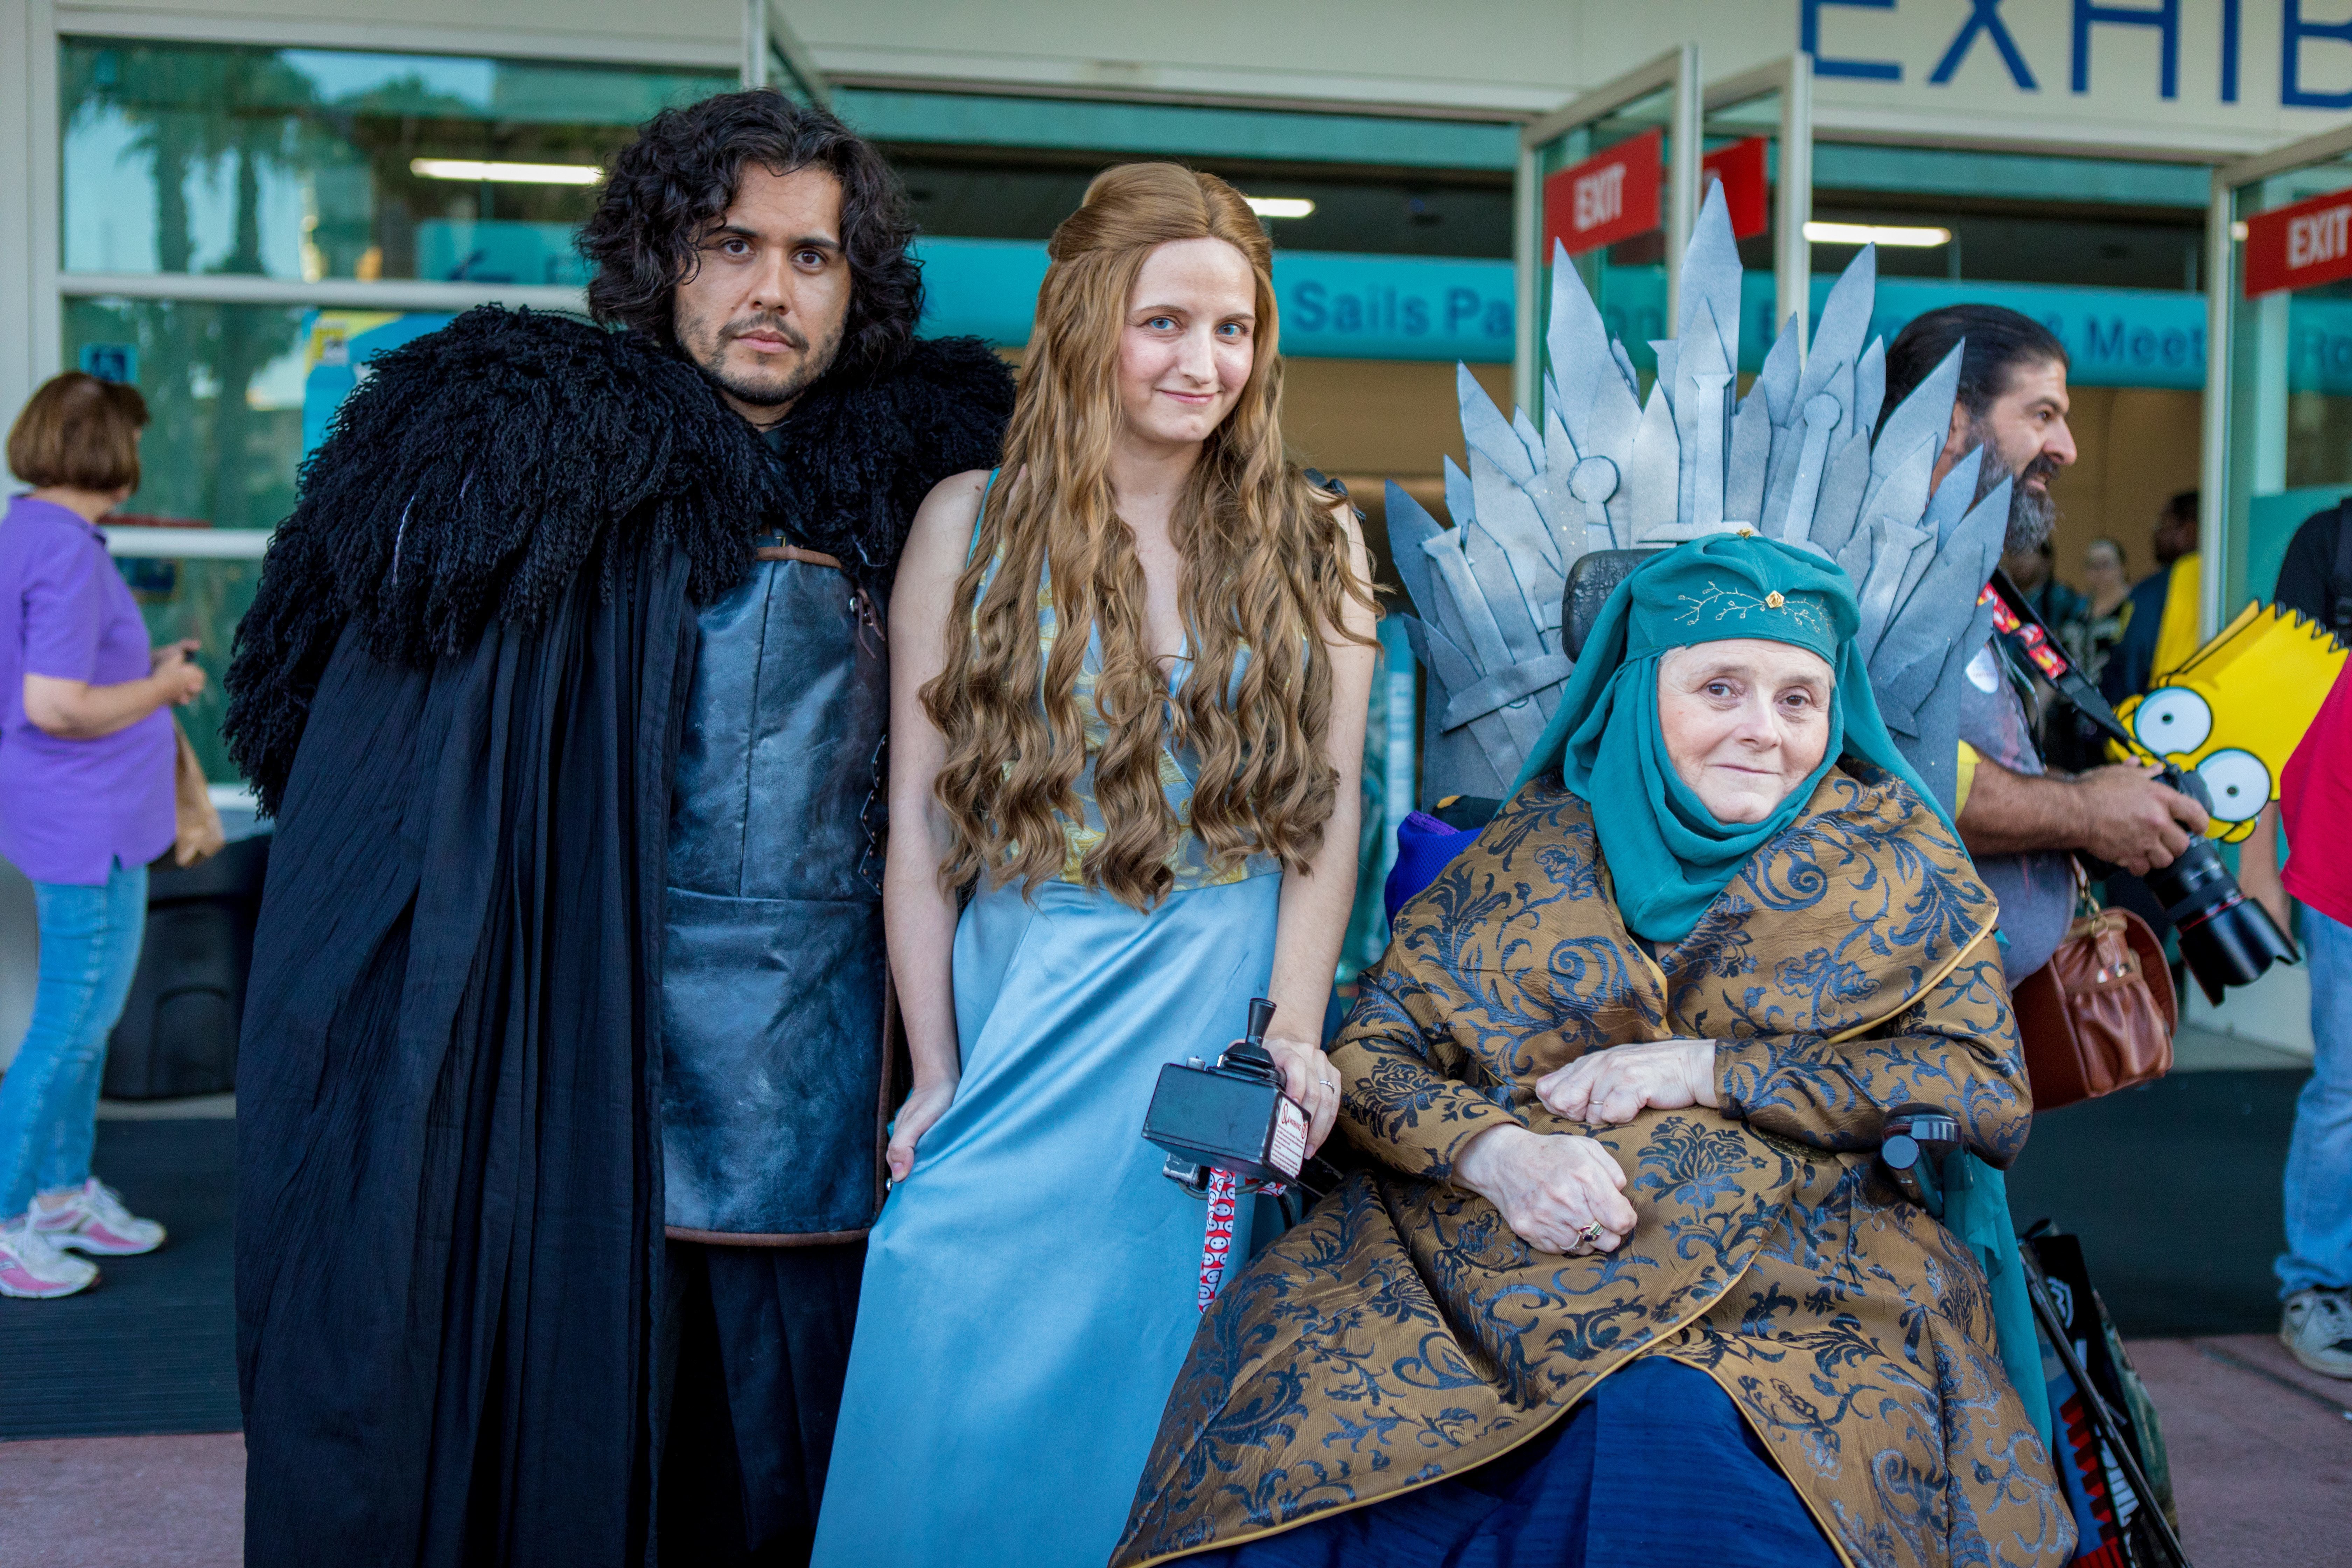 Cosplayers Carlos as John Snow (left), Baraciel as Margaery Tyrell and Maria as Olenna Tyrell (Game of Thrones) at the Comic-Con, in July 2018. | usage worldwide Photo by: Frank Duenzl/picture-alliance/dpa/AP Images